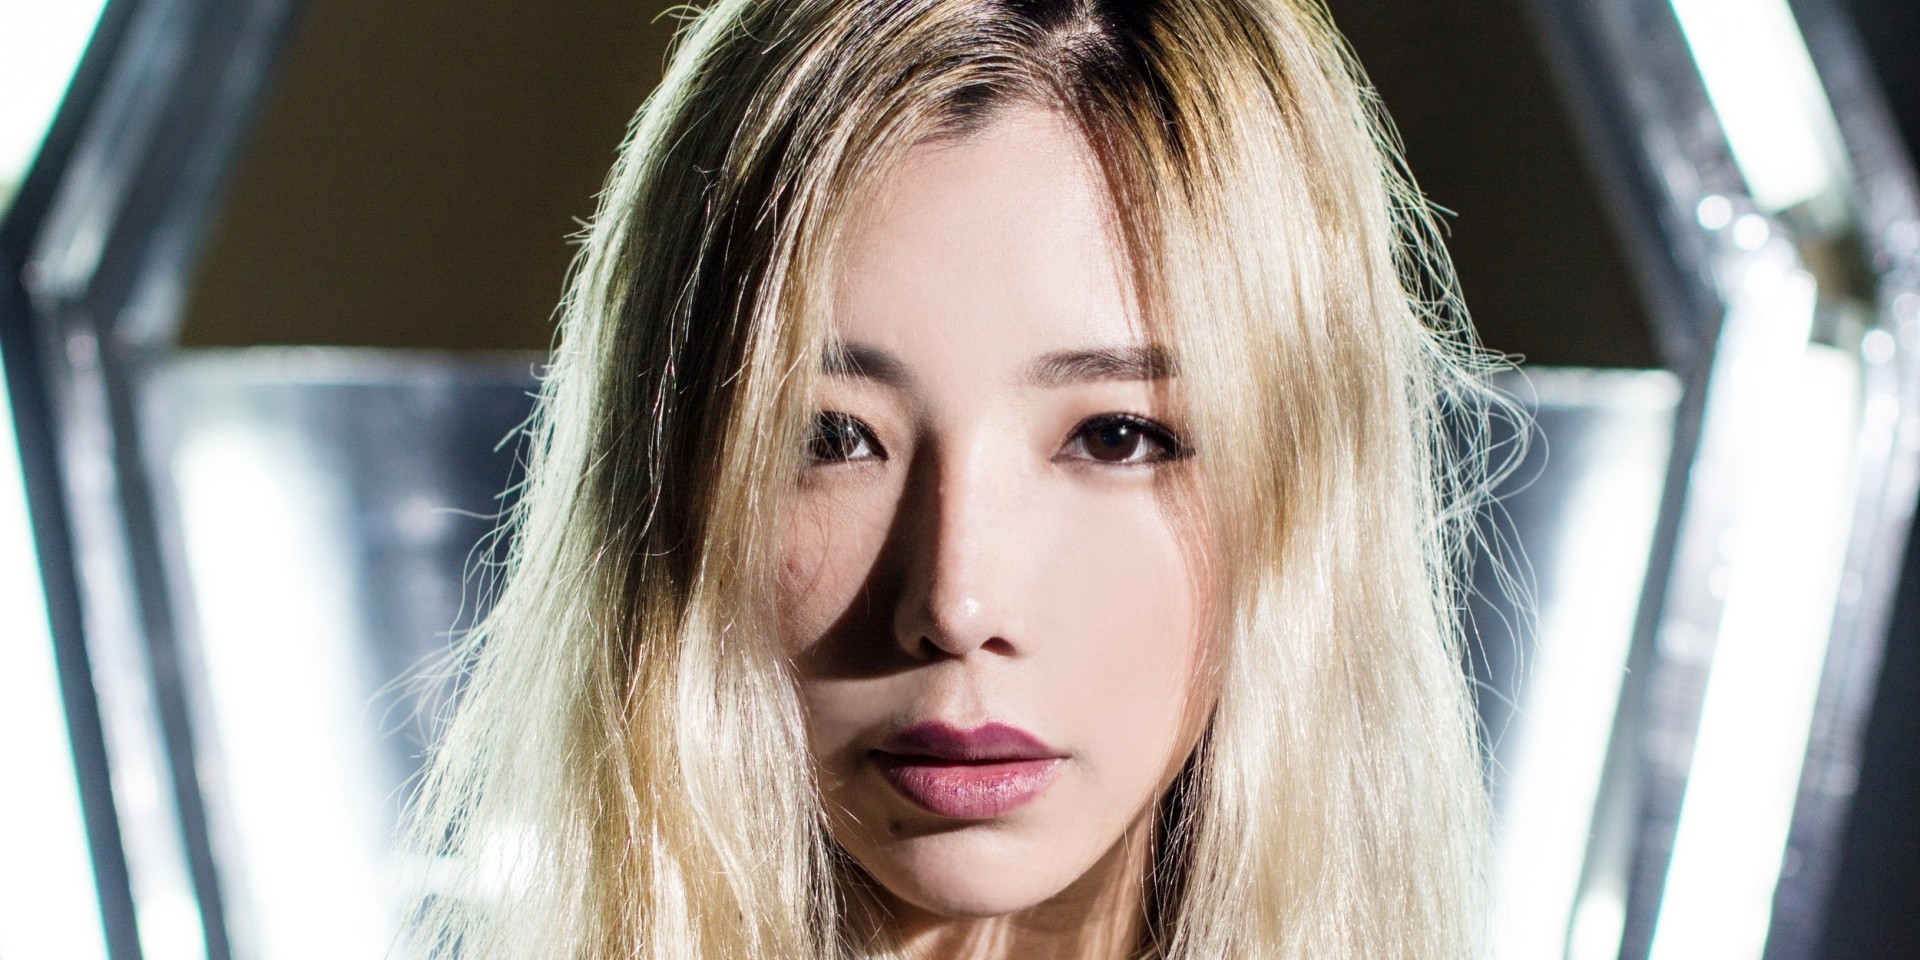 TOKiMONSTA to perform in Singapore and Malaysia next month